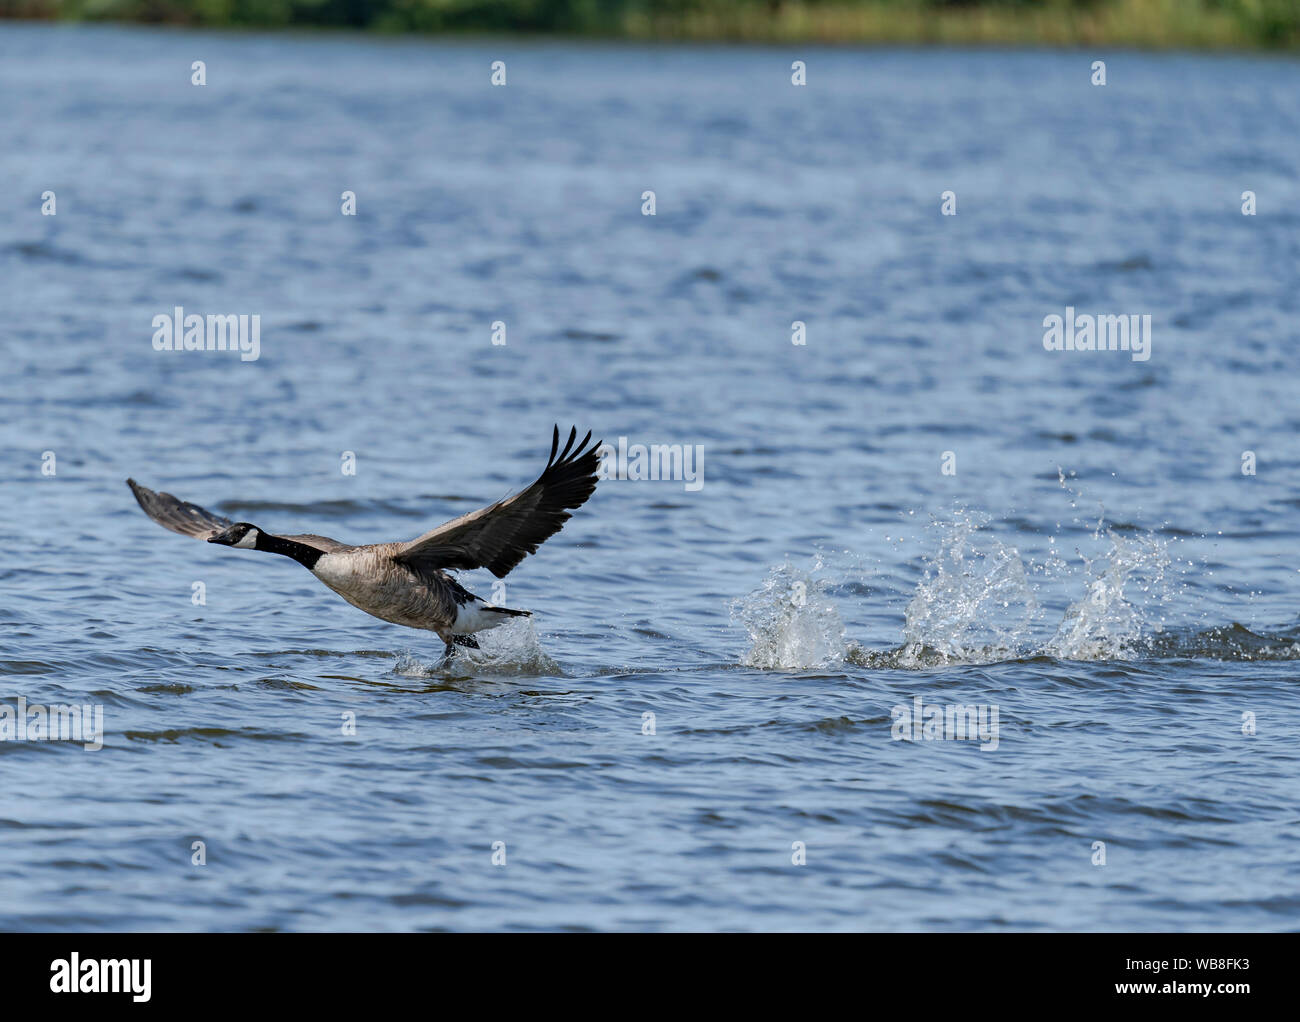 Canada Geese on a lake Stock Photo